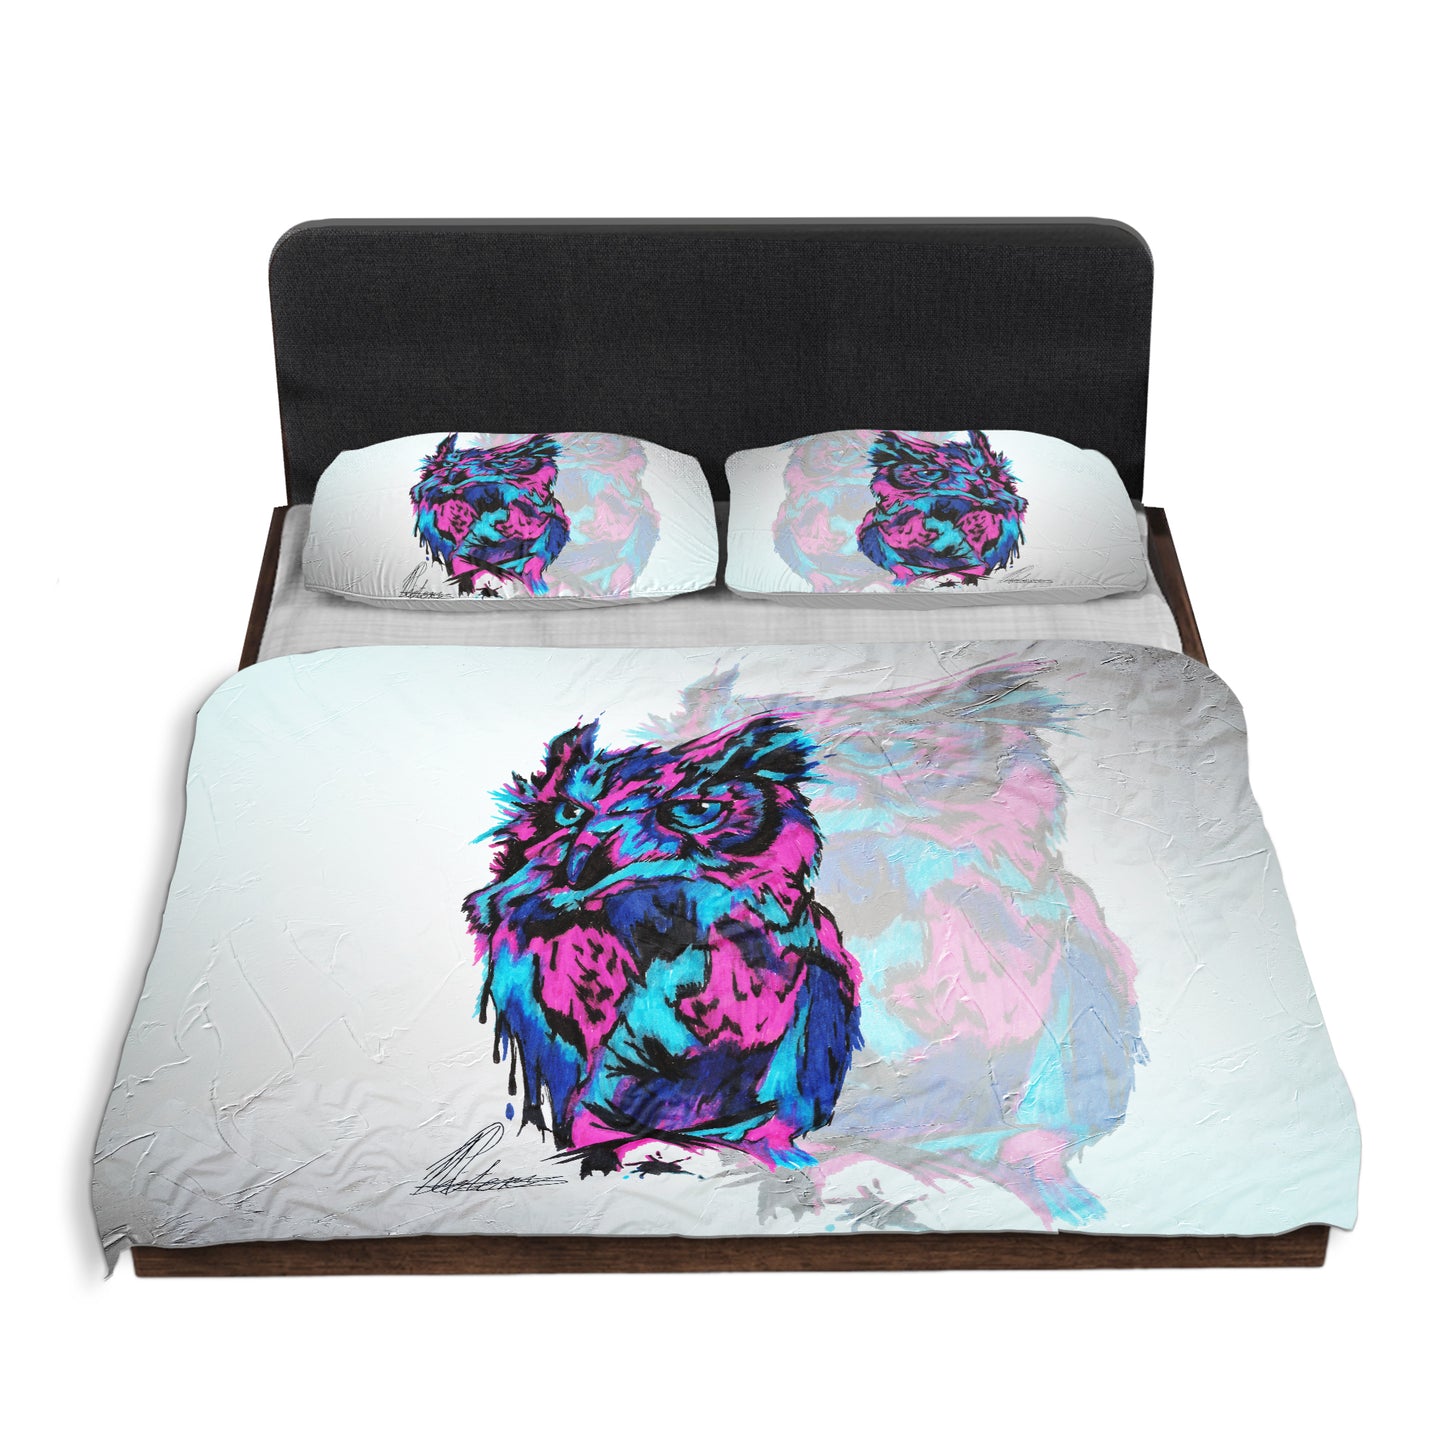 Bright Owl By Nathan Pieterse Duvet Cover Set